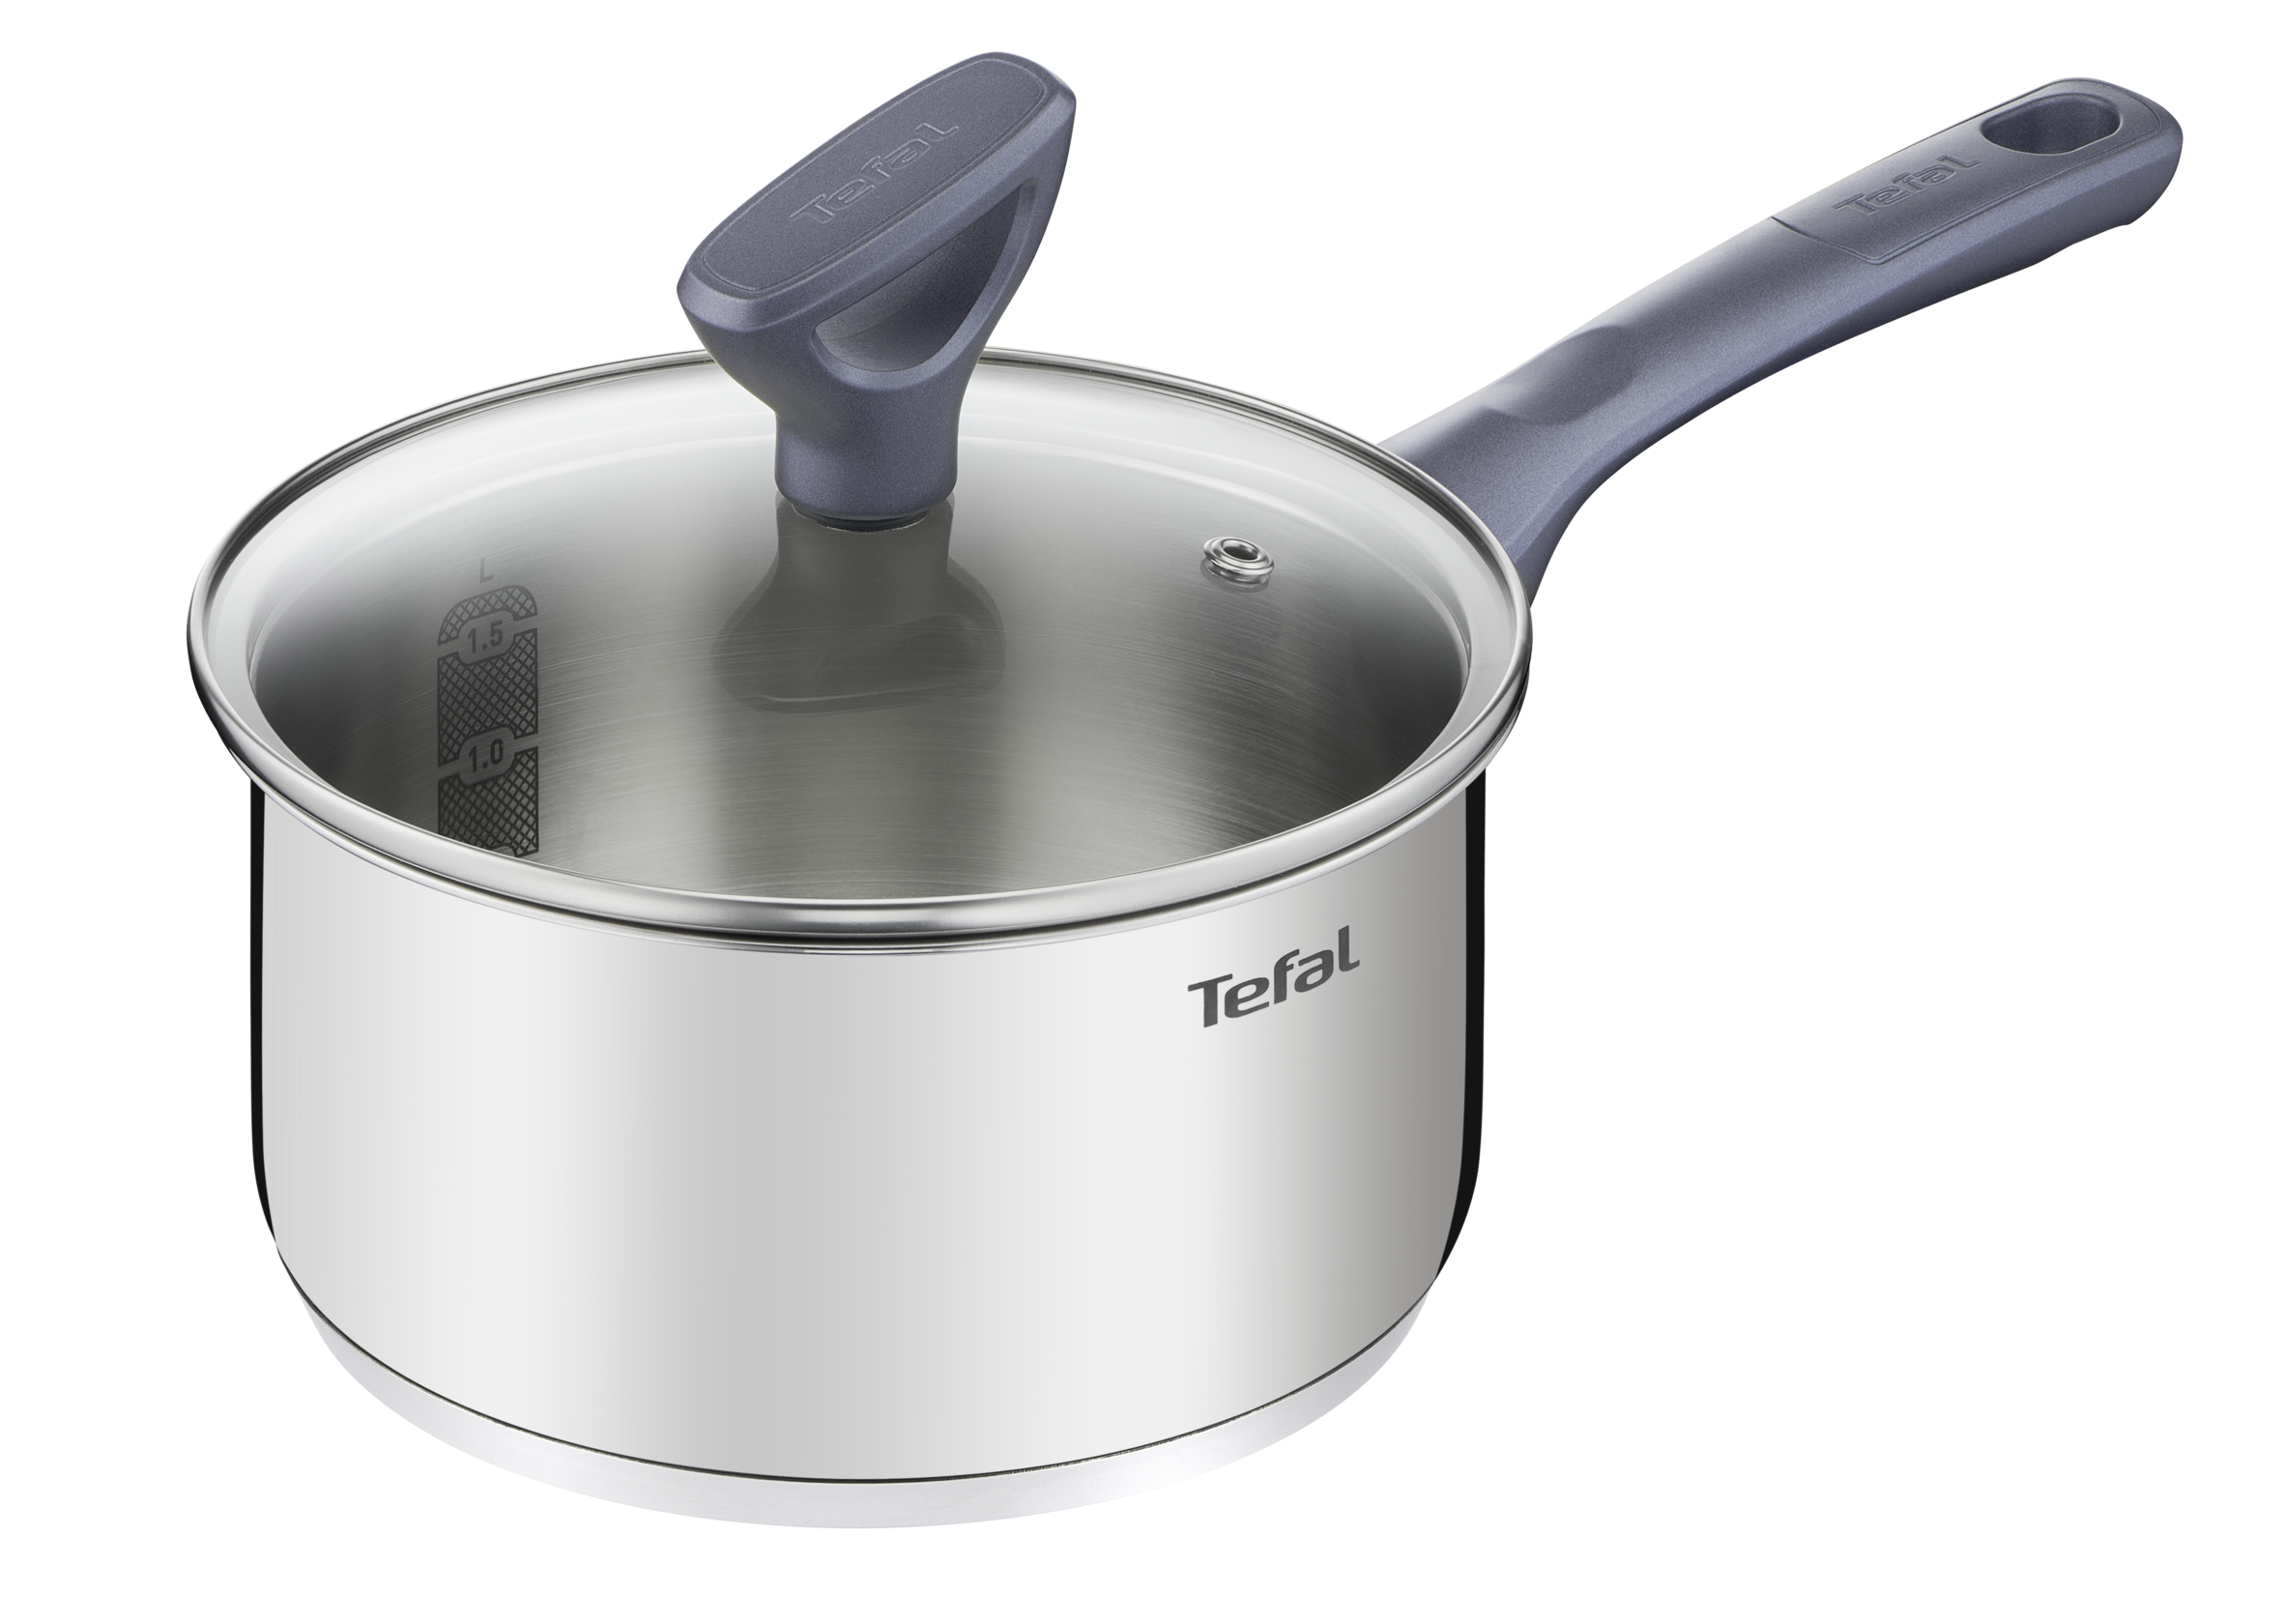 Tefal Daily Cook Stainless Steel Induction Saucepan 16cm/1.5L + Lid